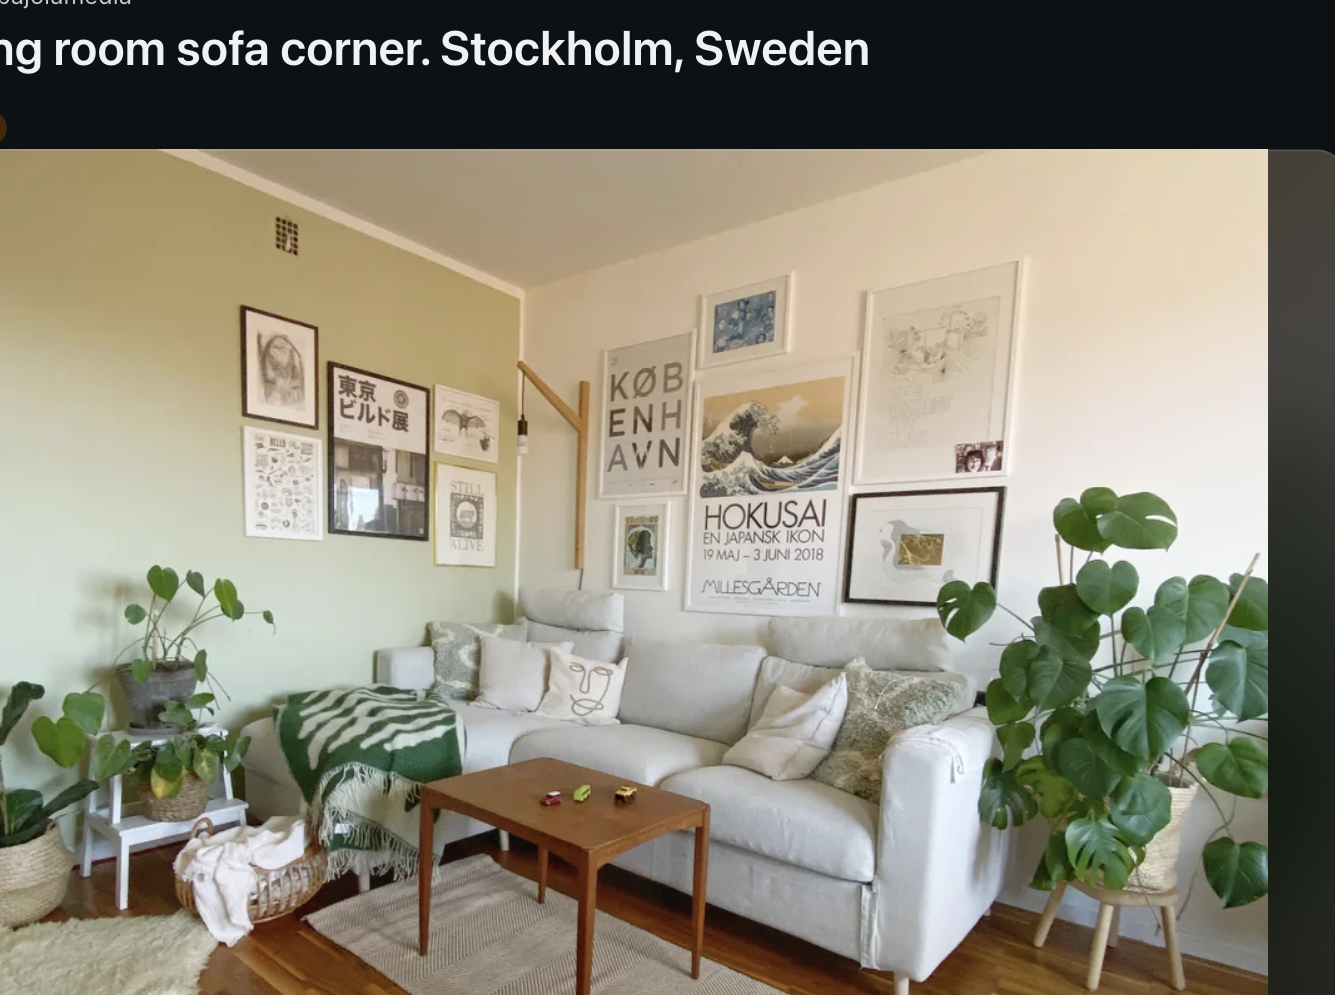 A cozy living room corner in Stockholm, Sweden, featuring a beige sofa adorned with cushions, a small wooden table, and green plants. Wall art is displayed above the sofa